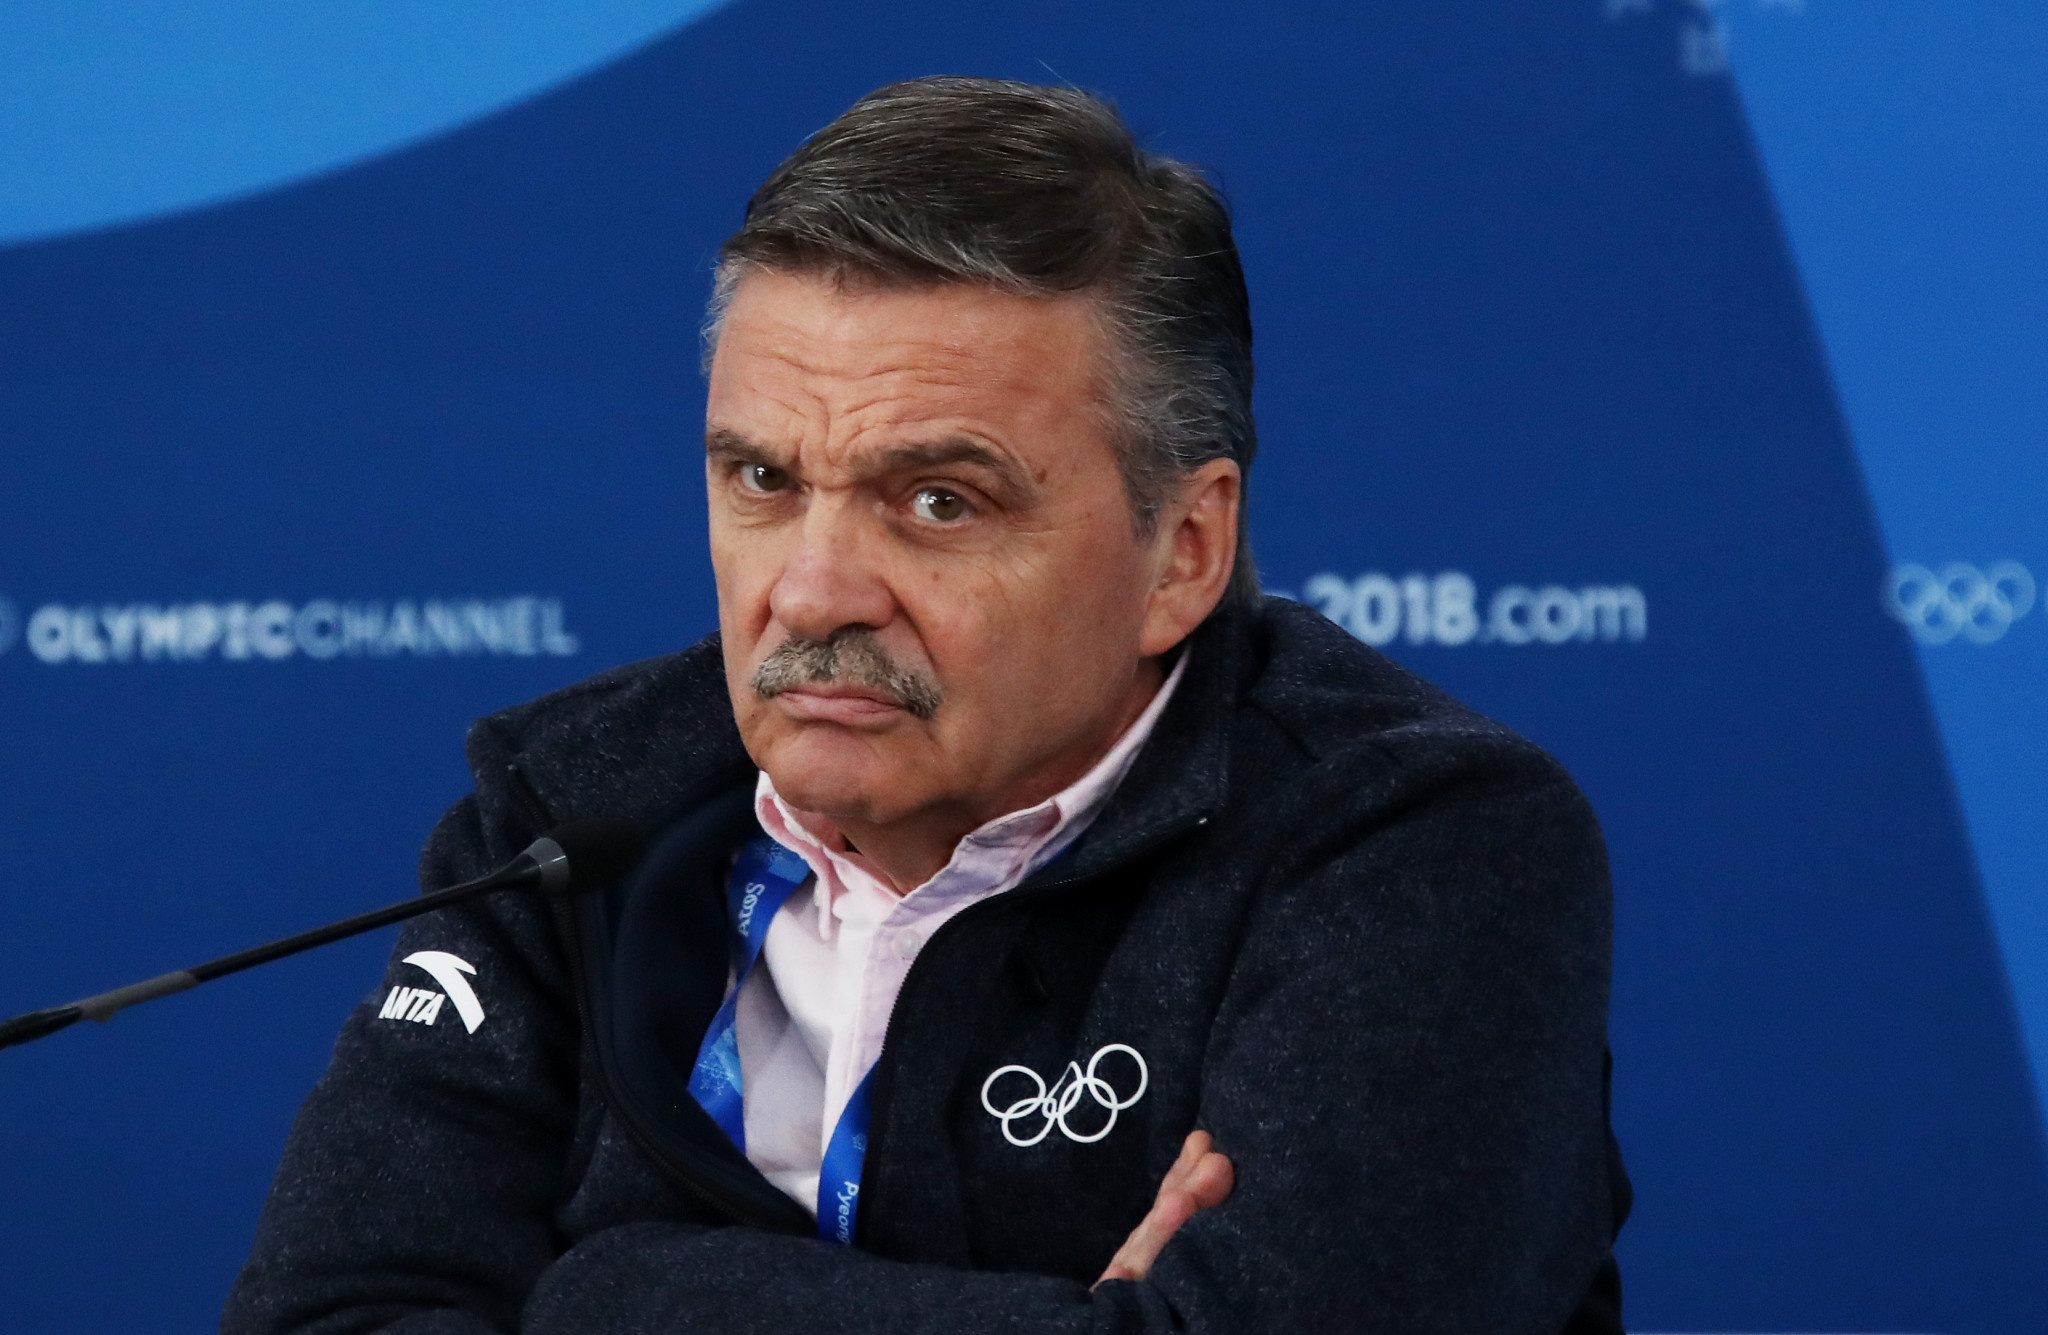 IIHF President Fasel suggests Belarus will get financial compensation after Men's World Championship moved